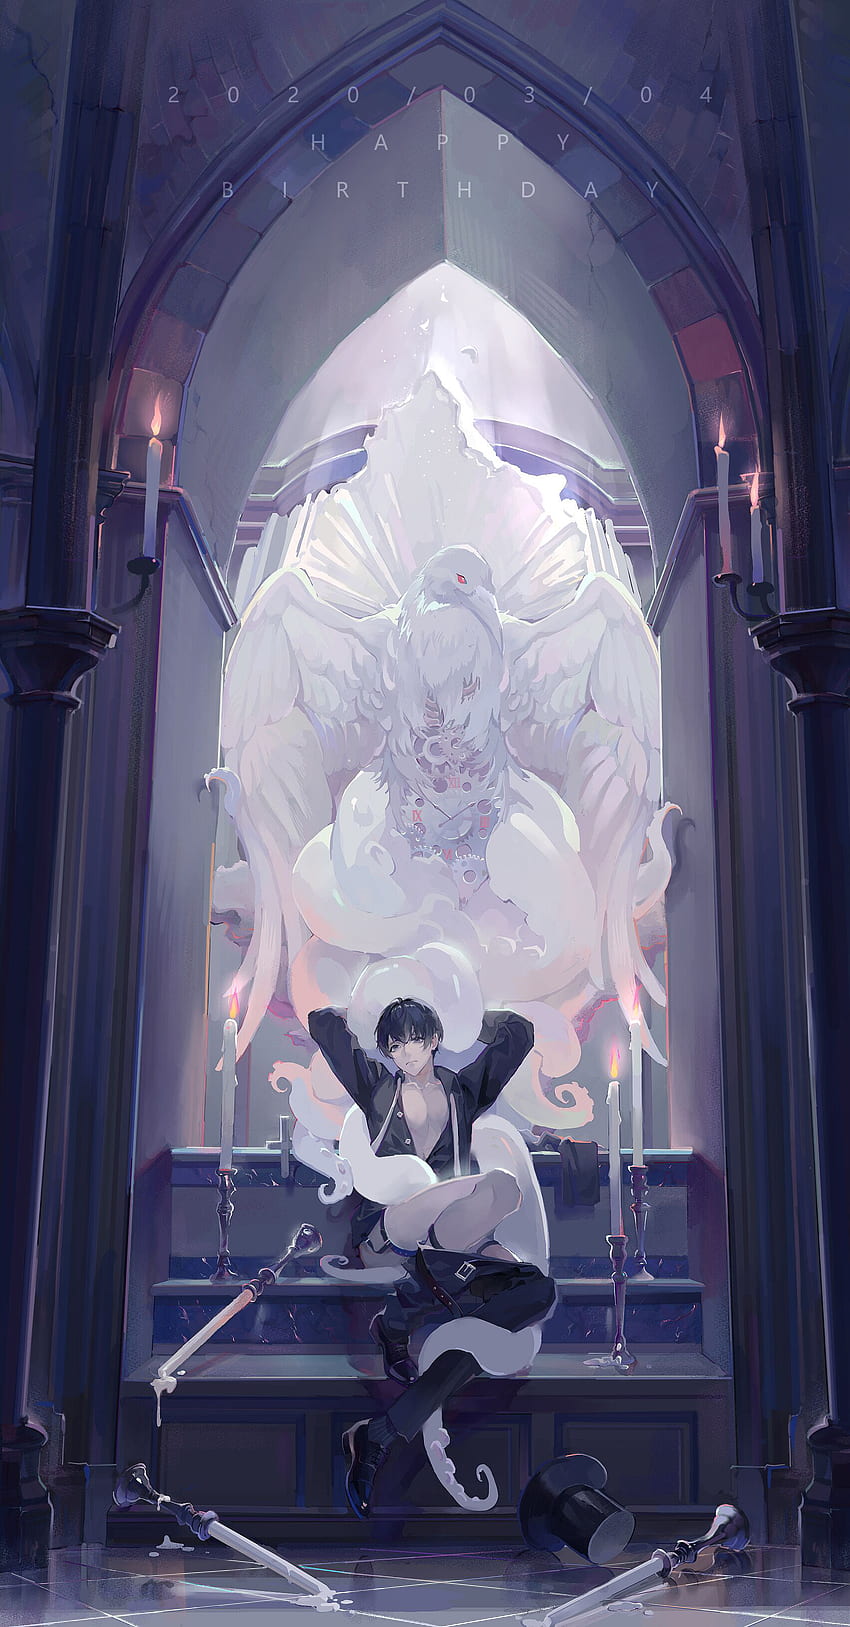 Lord of the Mysteries Fanarts. Anime art, Anime drawings, Fantastic art, Lord of Mysteries HD phone wallpaper